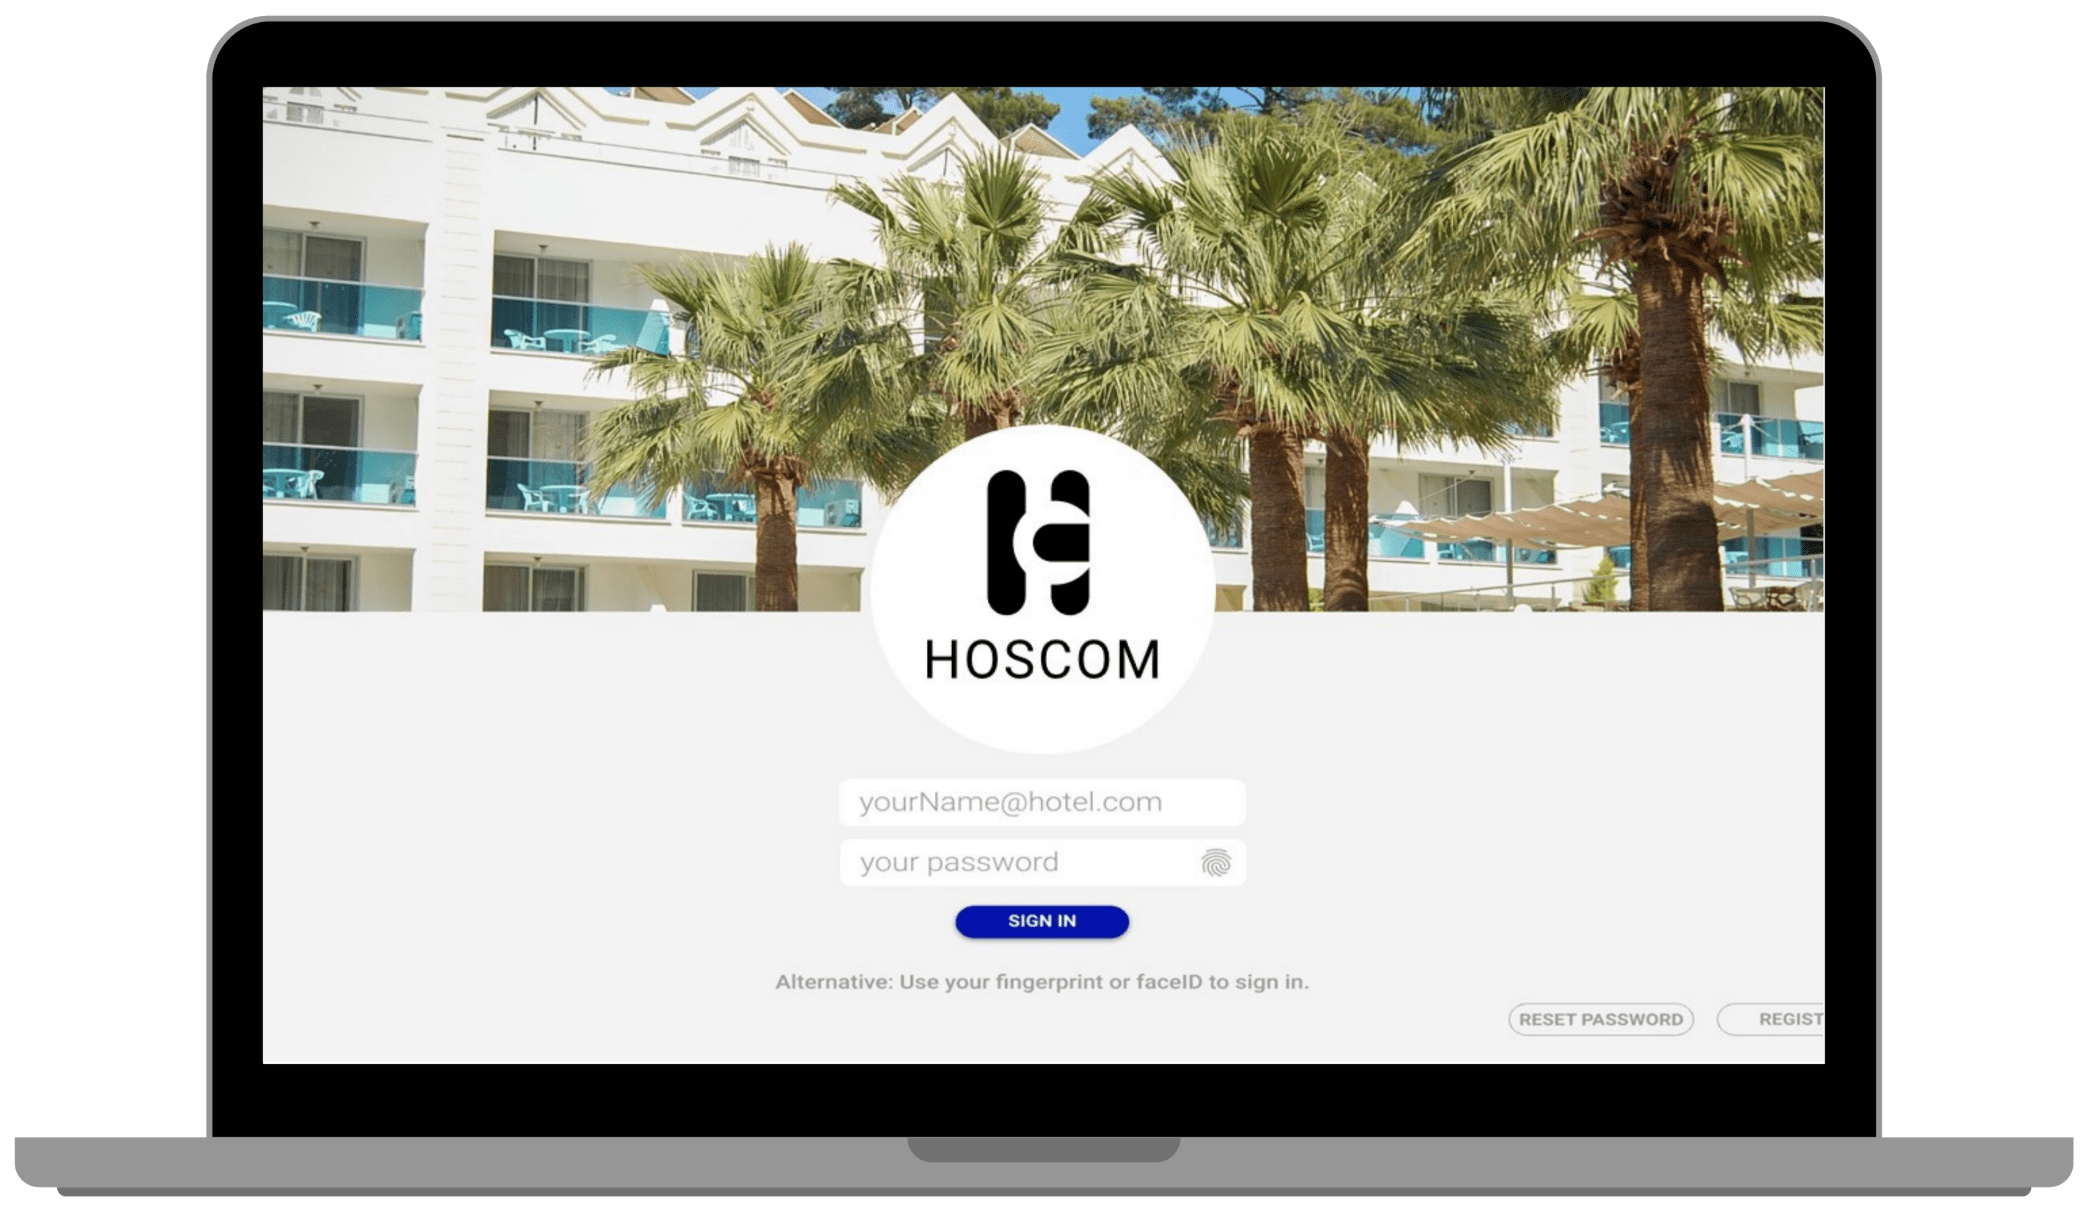 Get to know your new communication <br> platform for your hotel!